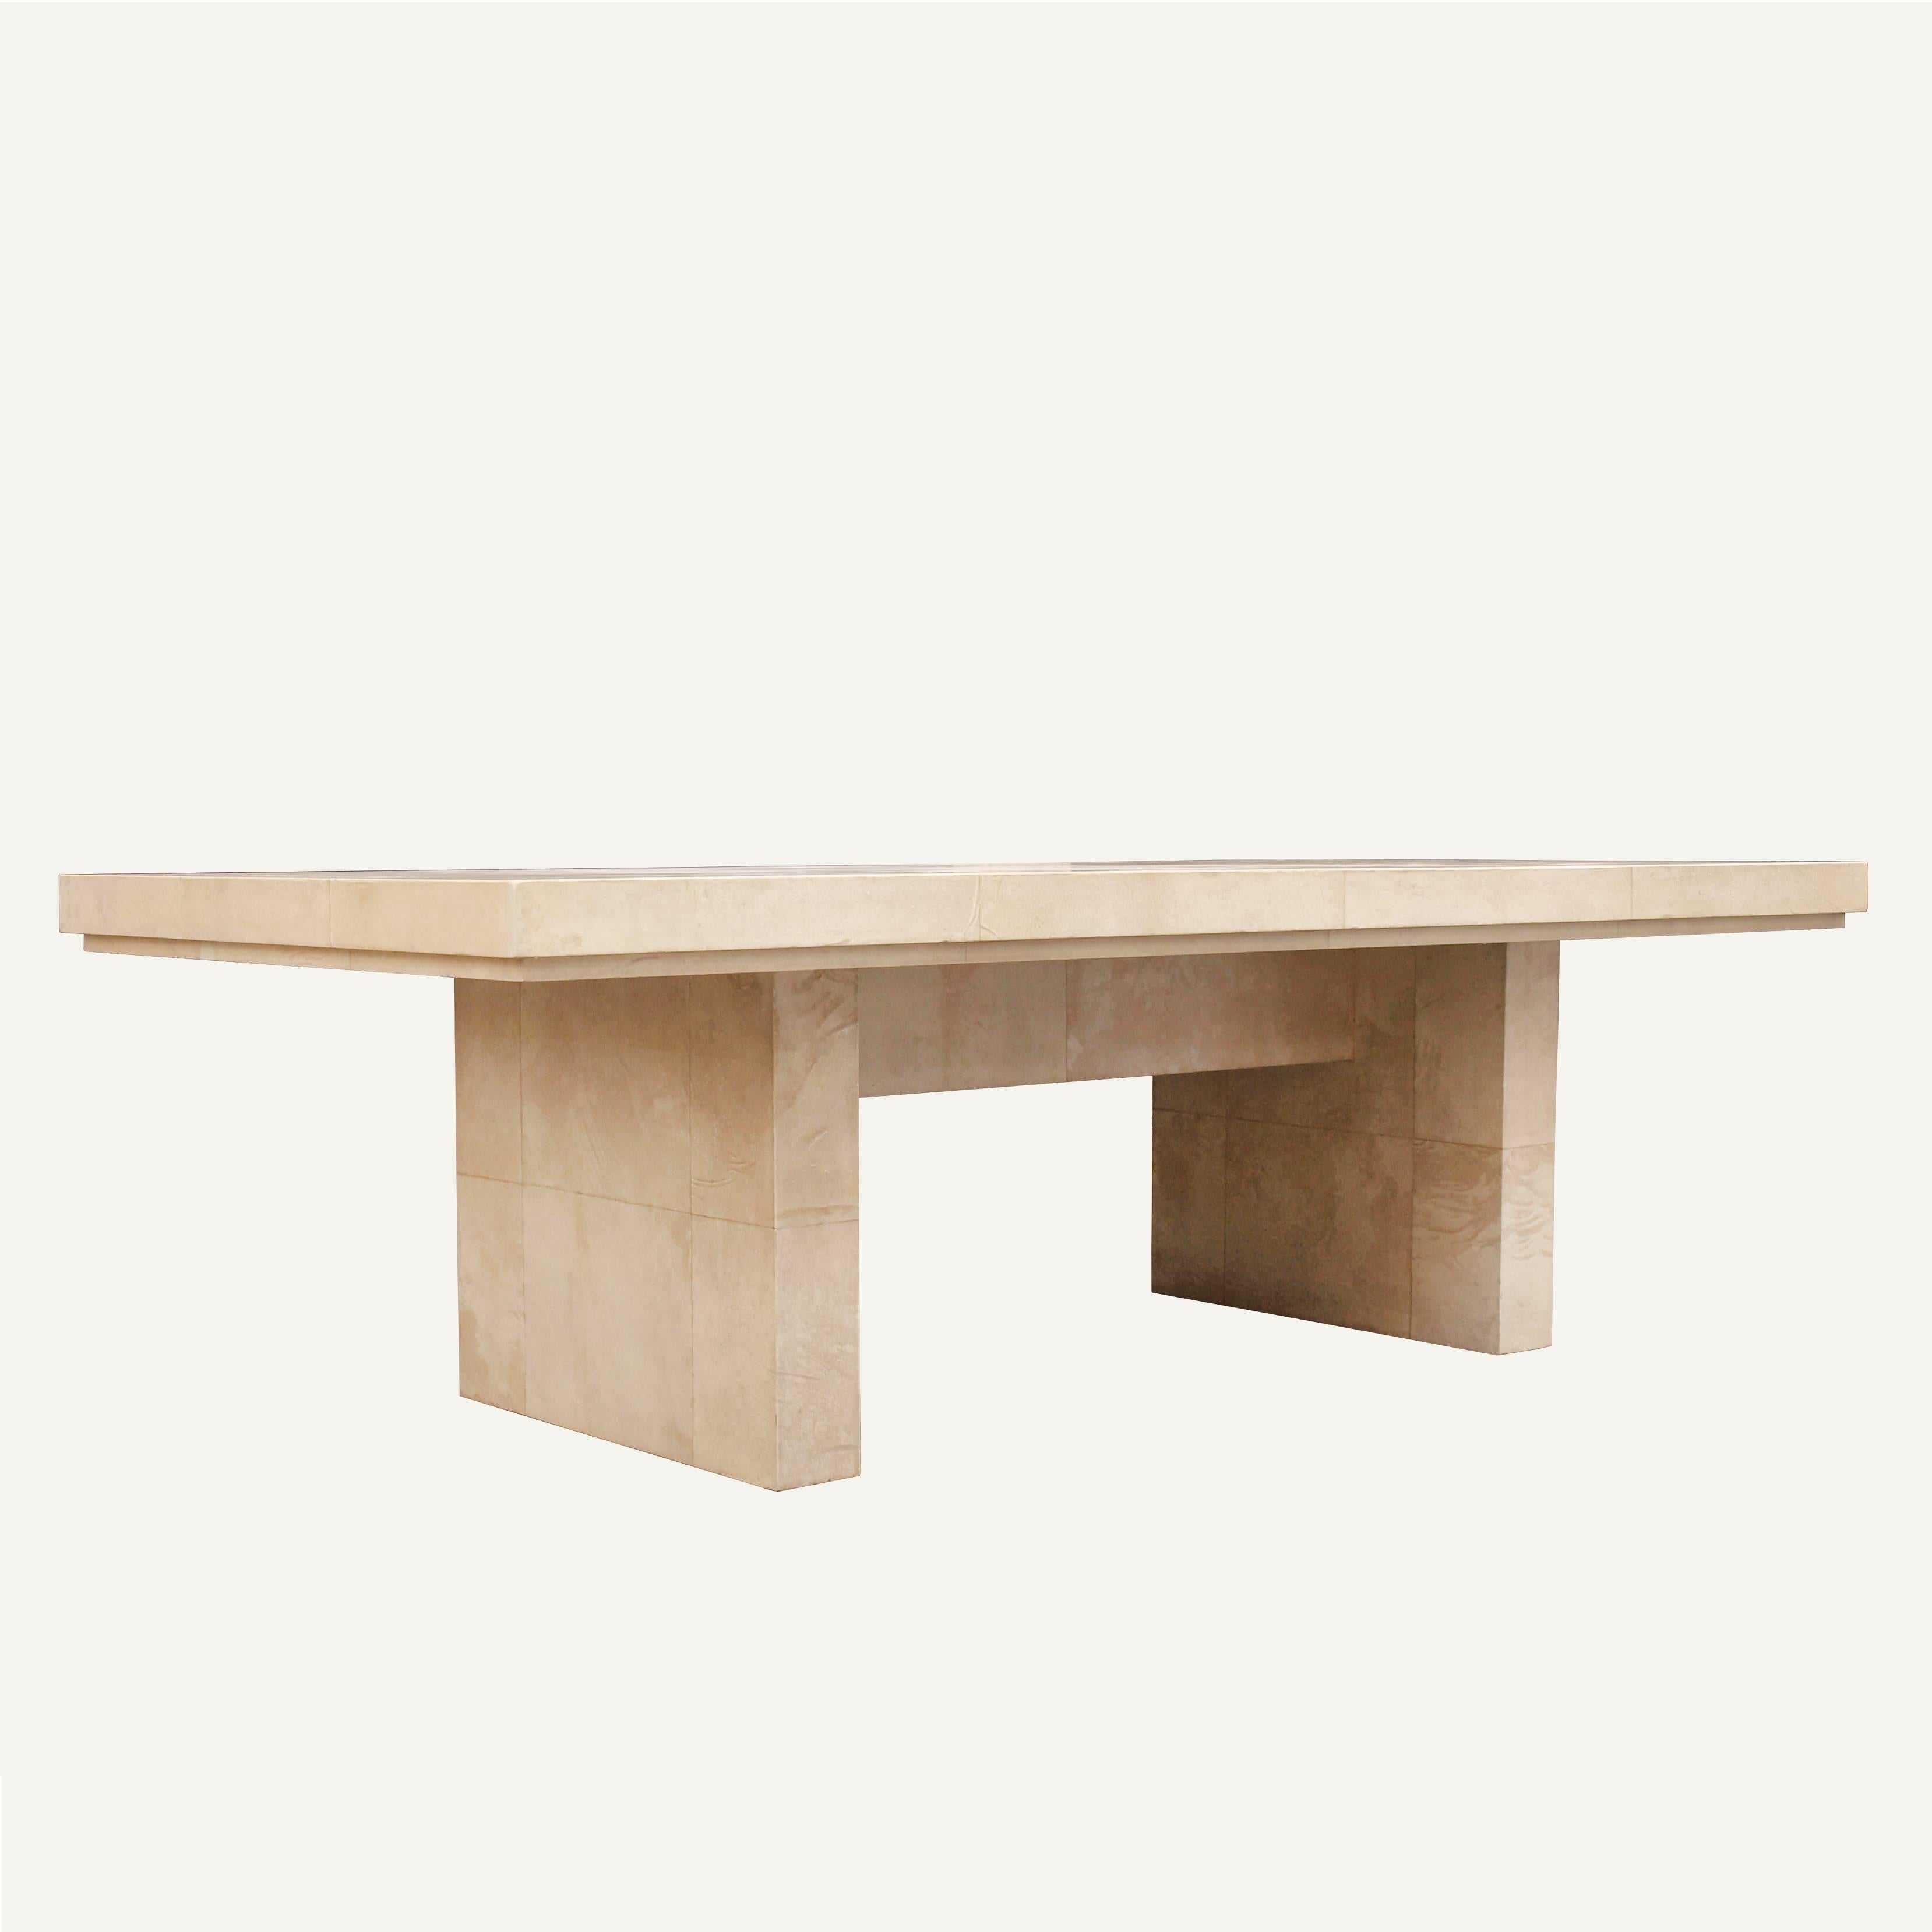 A large modernist dining table covered in natural beige goatskin parchment. The parchment has a straight cut rectangular inlay pattern and smooth matte lacquer finish. Simple and clean lined this table can also be used as a statement piece desk.